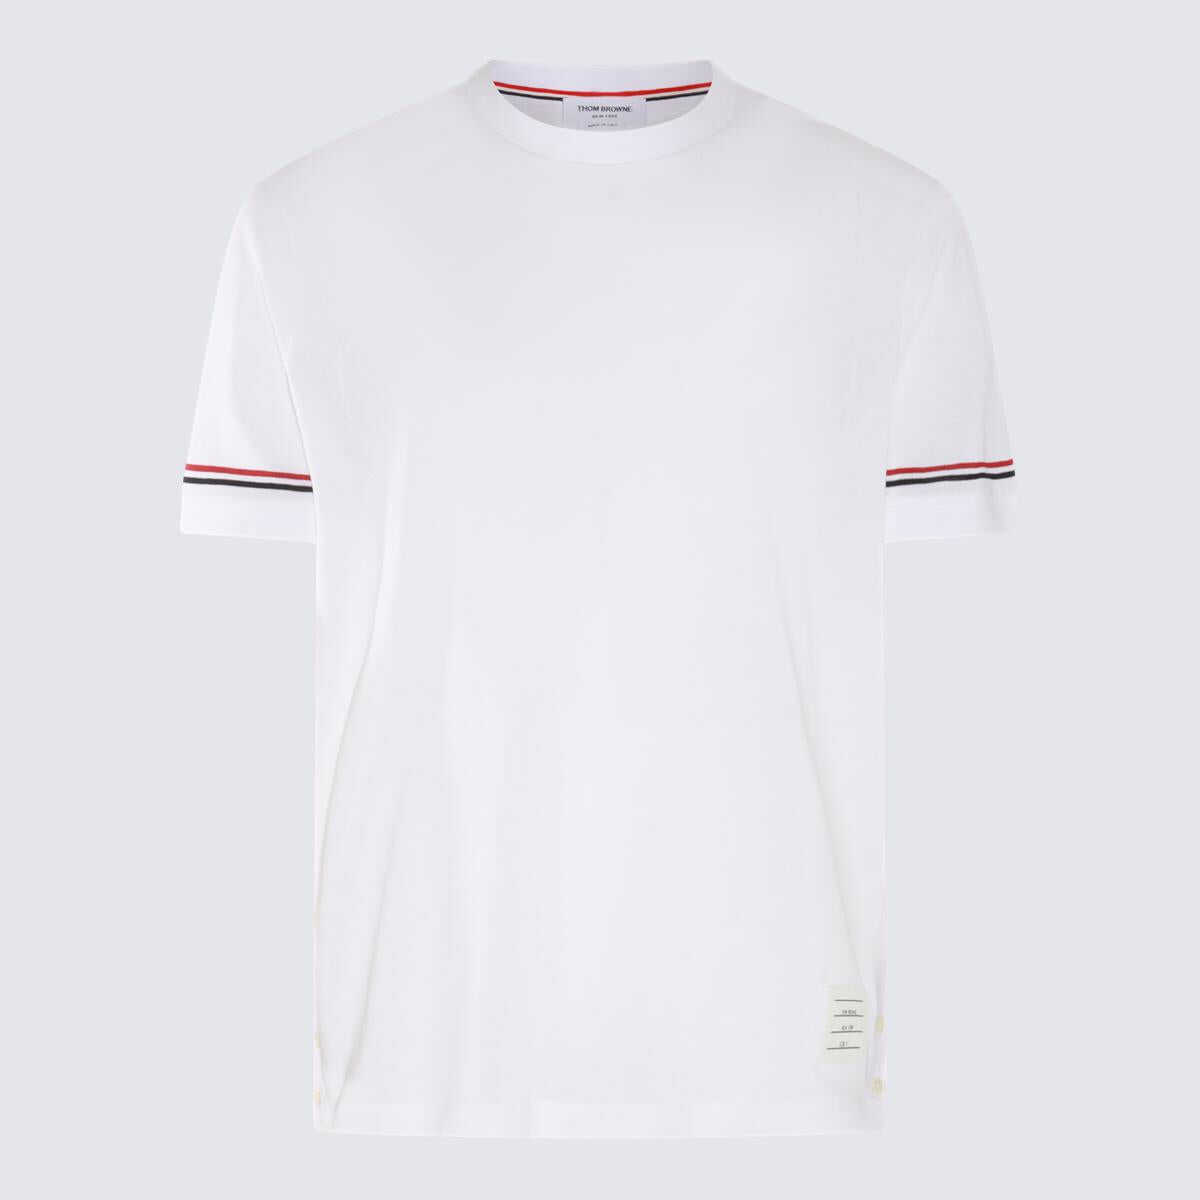 Thom Browne THOM BROWNE WHITE, RED AND BLUE COTTON T-SHIRT WHITE